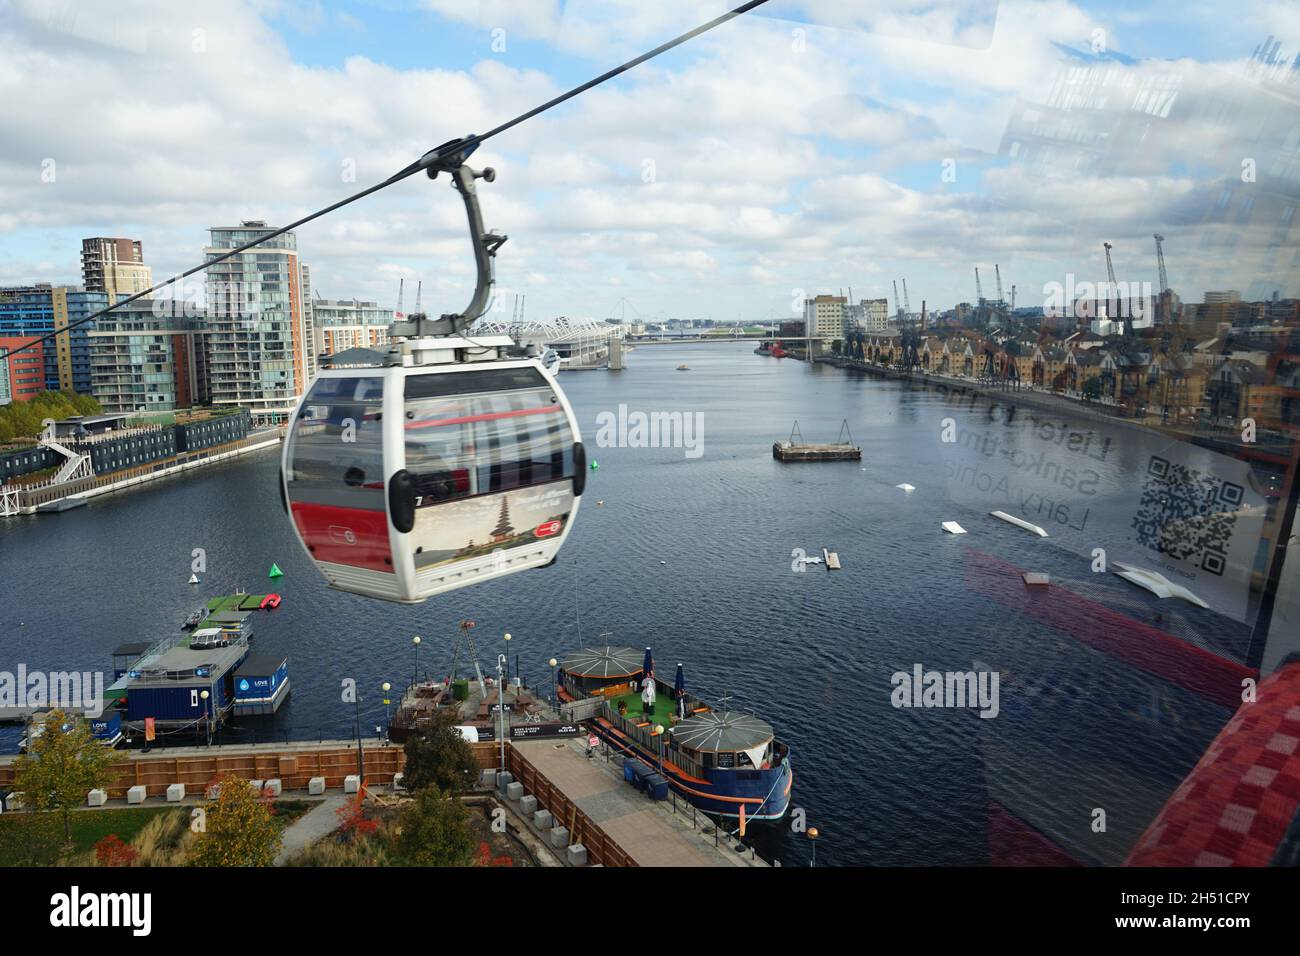 Emirates cable car zip lining over London River Thames in he U.K Stock Photo